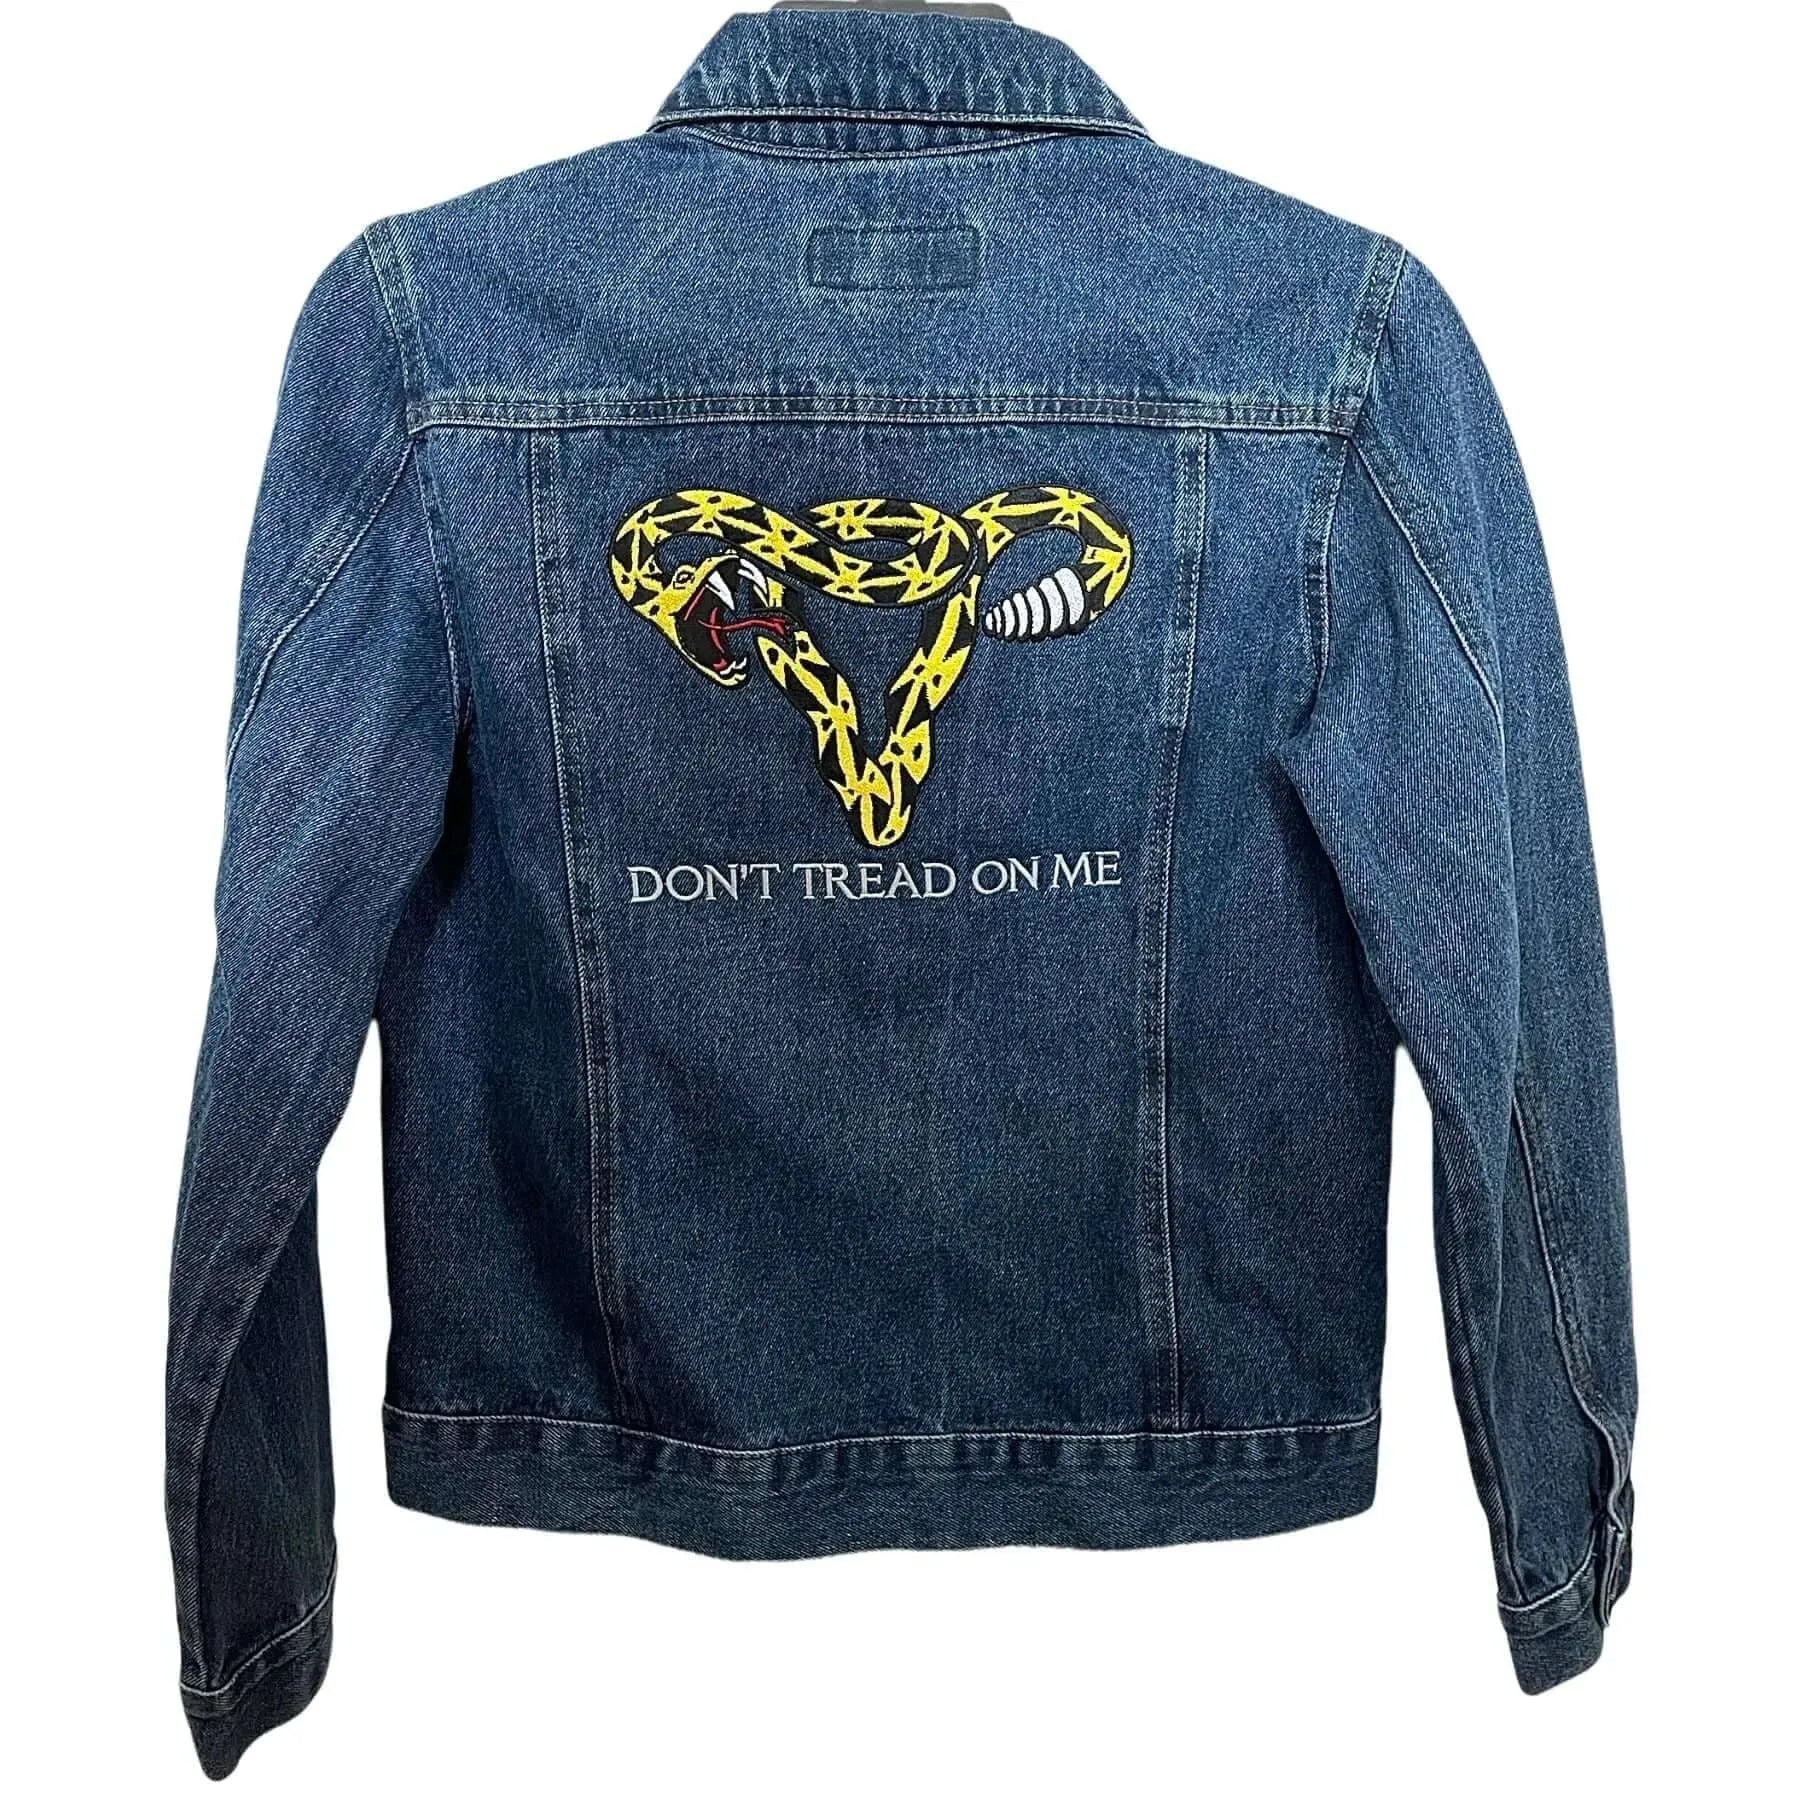 Don’t Tread On Me rattlesnake pro choice uterus embroidered women’s denim jean jacket. independent female artist supporting planned parenthood, women’s rights, abortion is healthcare , pro choice roe vs wade my body my choice healthcare gender equality te